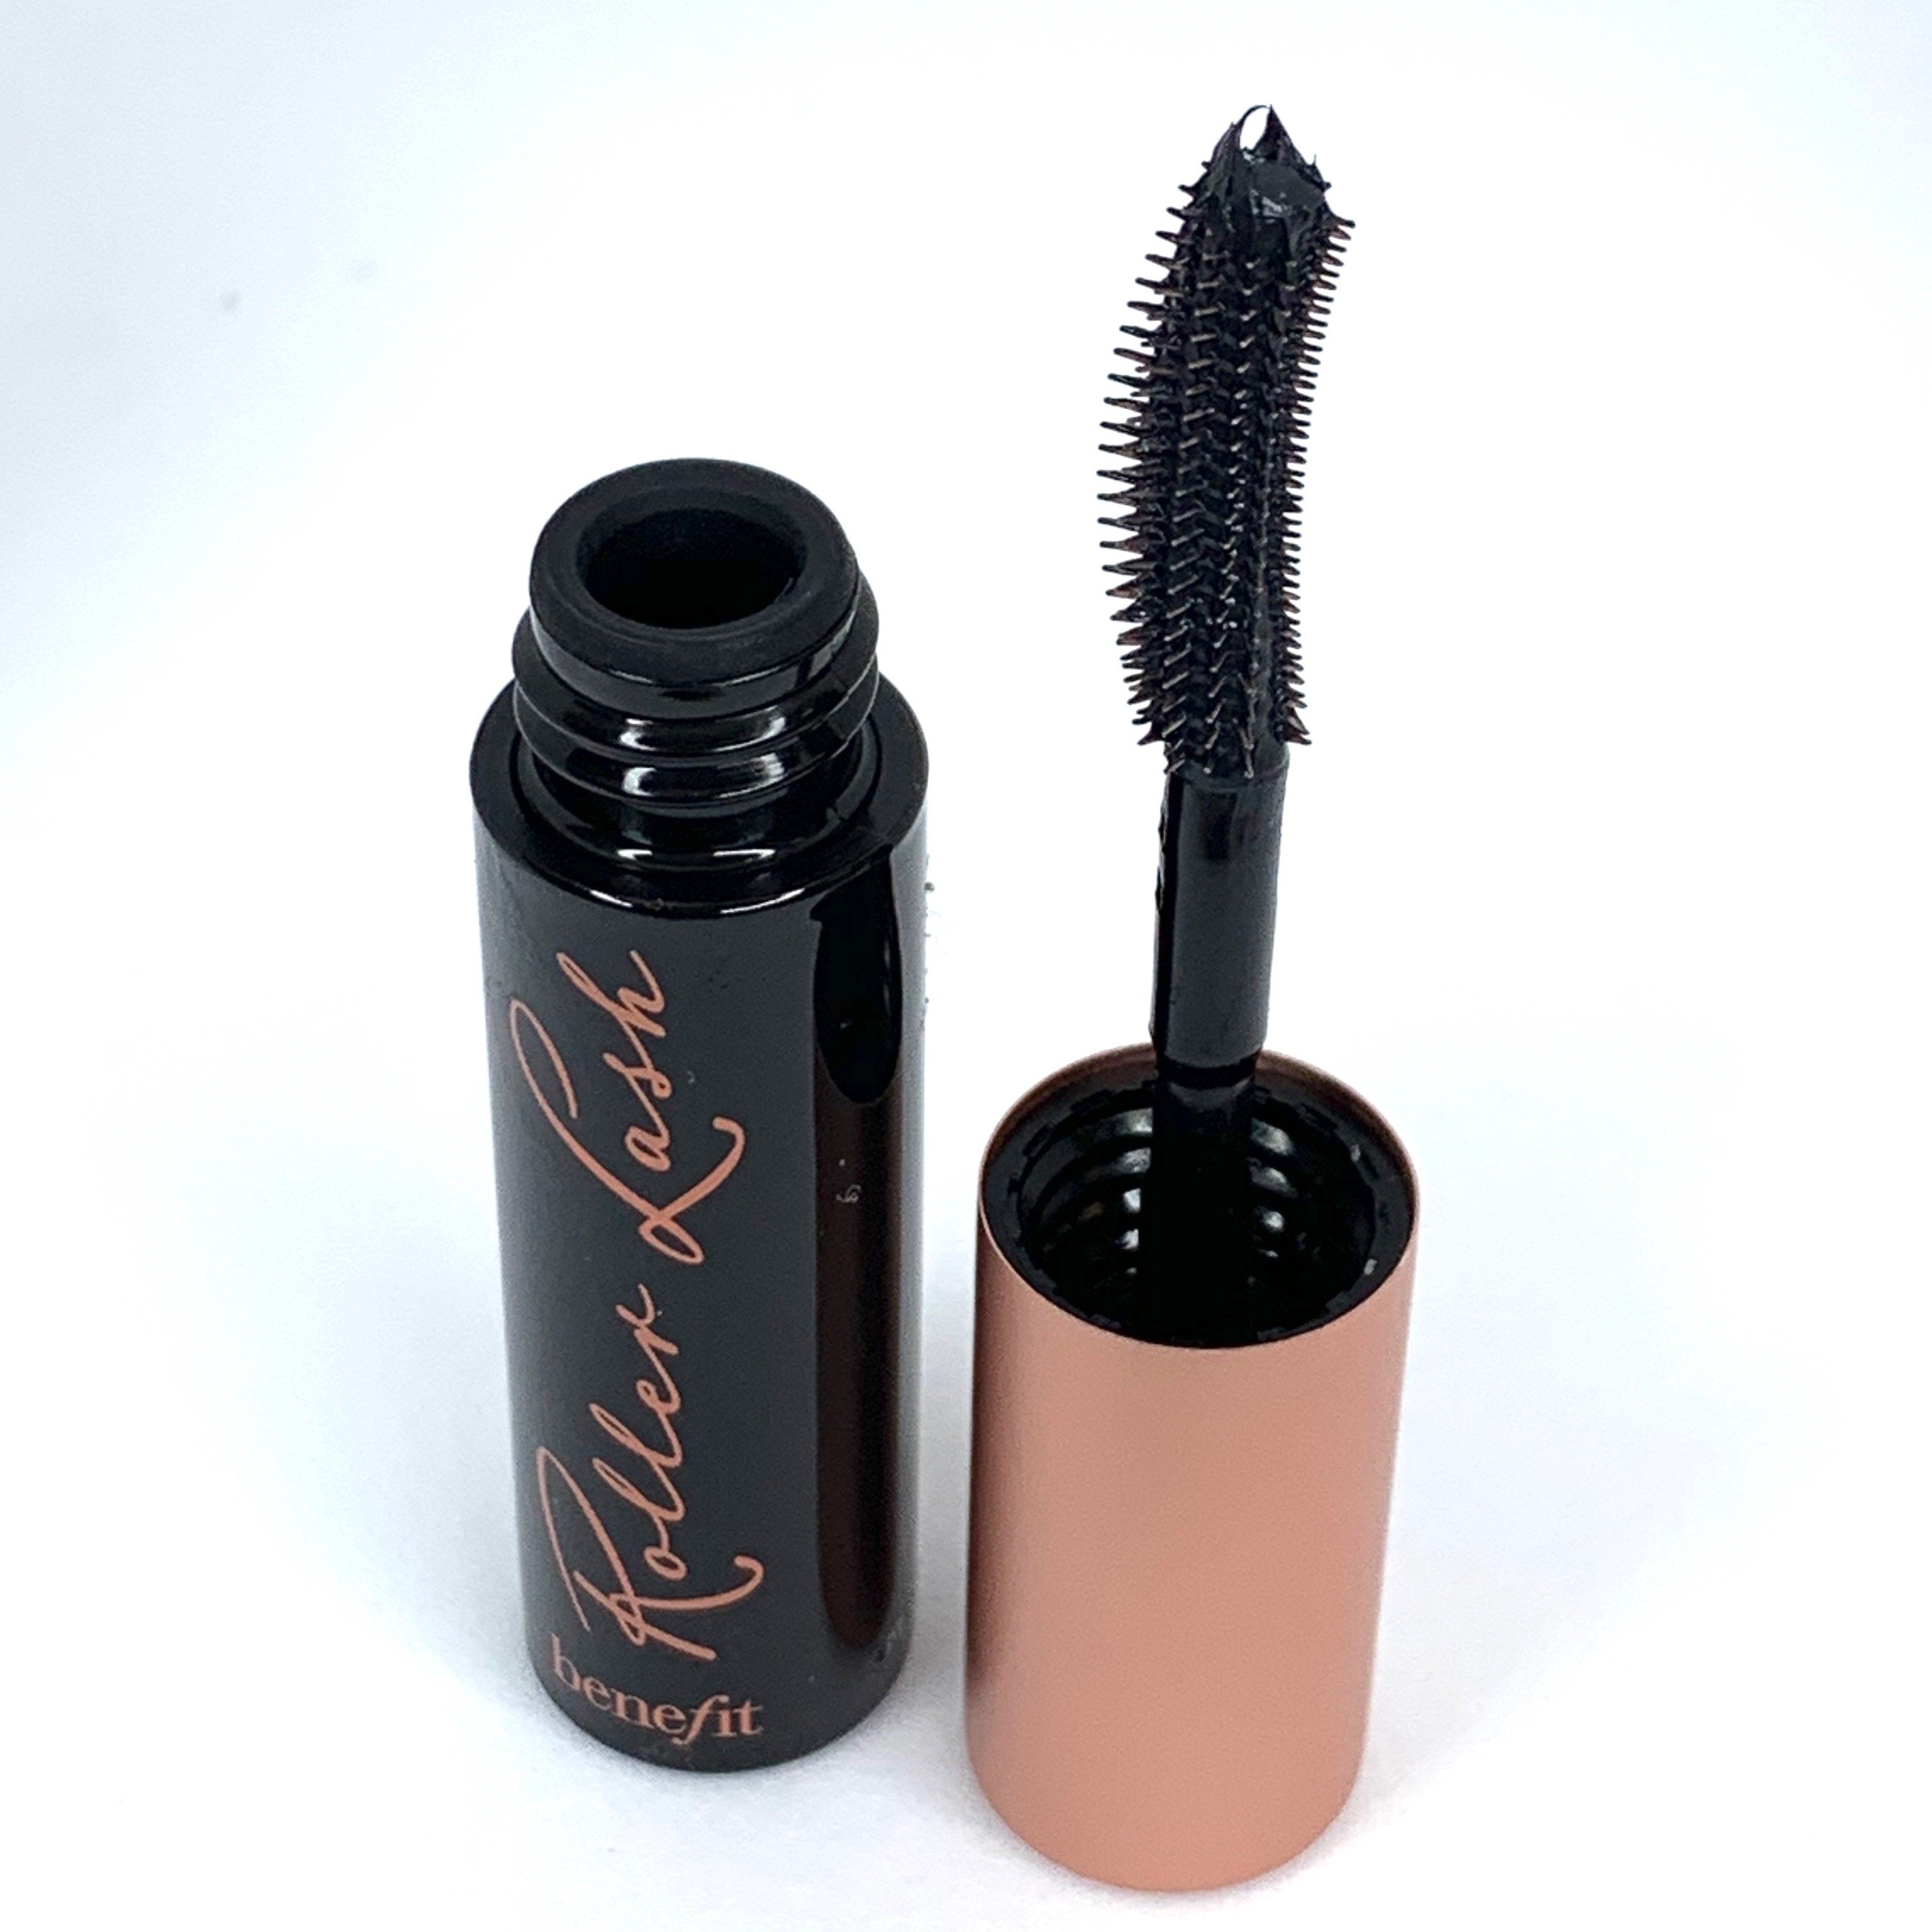 Benefit Roller Lash Black Mascara Open for Ipsy May 2020